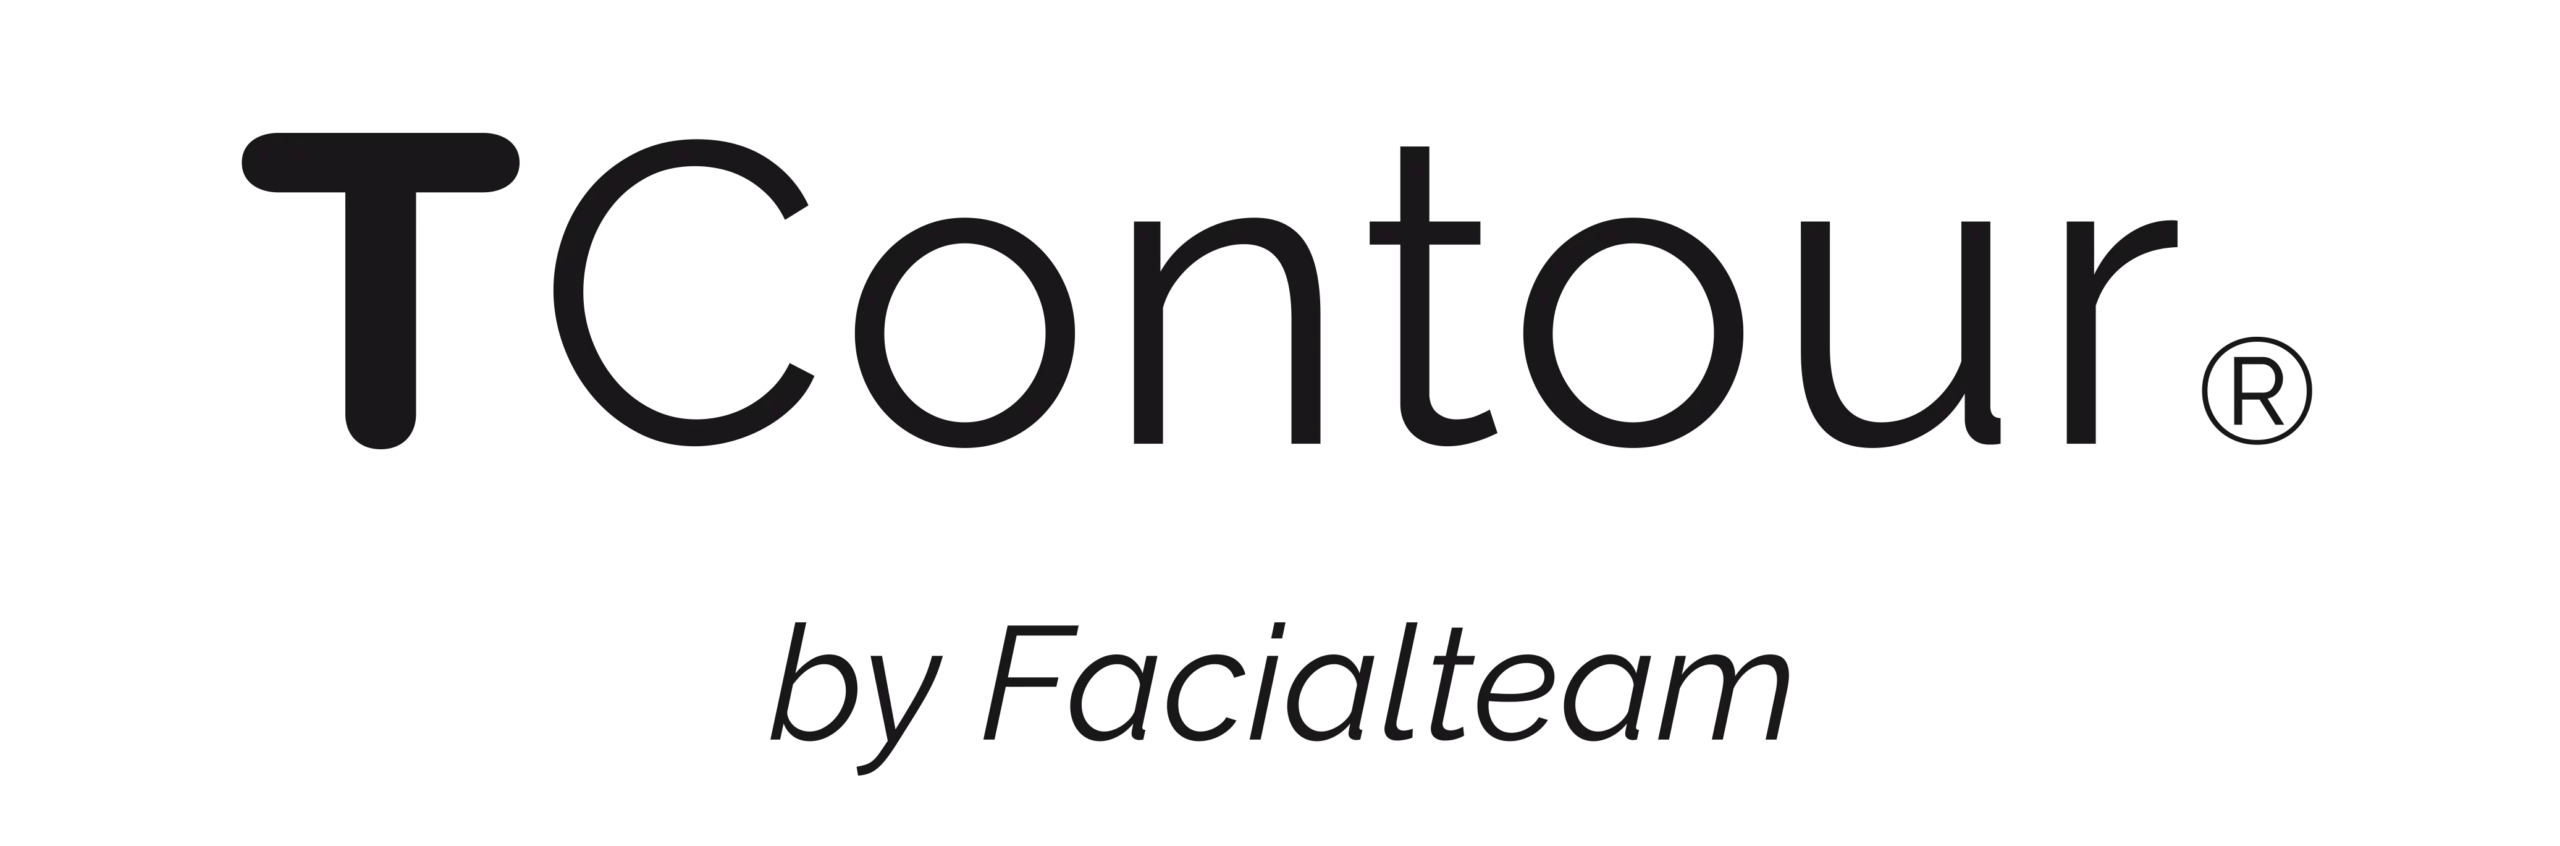 Our TContour procedure based on years of expertise by our Facialteam FFS surgeons